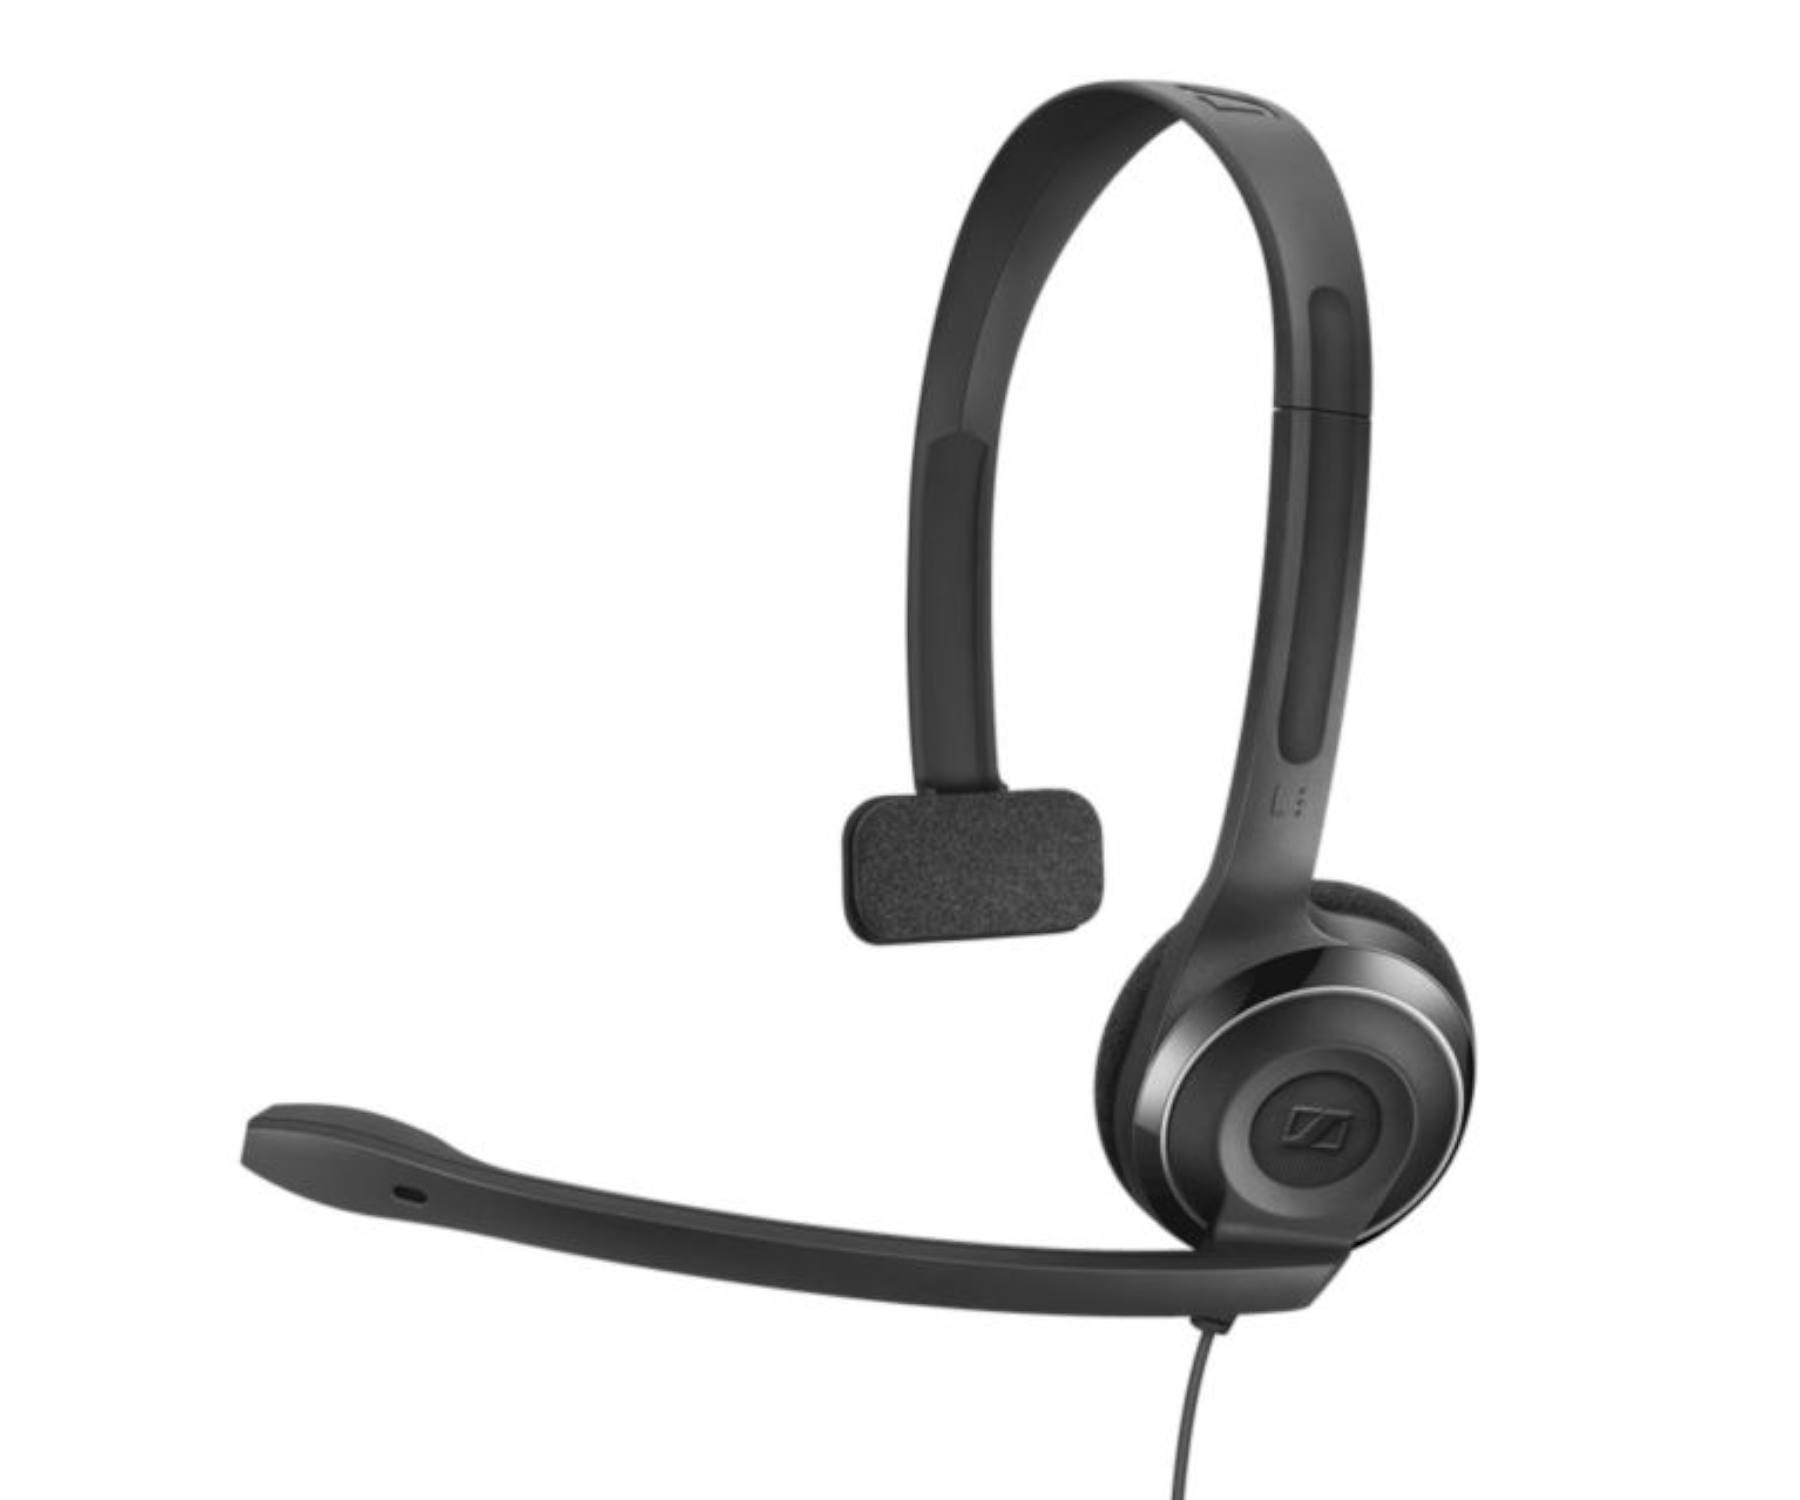 EPOS PC 7 Chat Black / Auricular Monoaural OnEar con cable